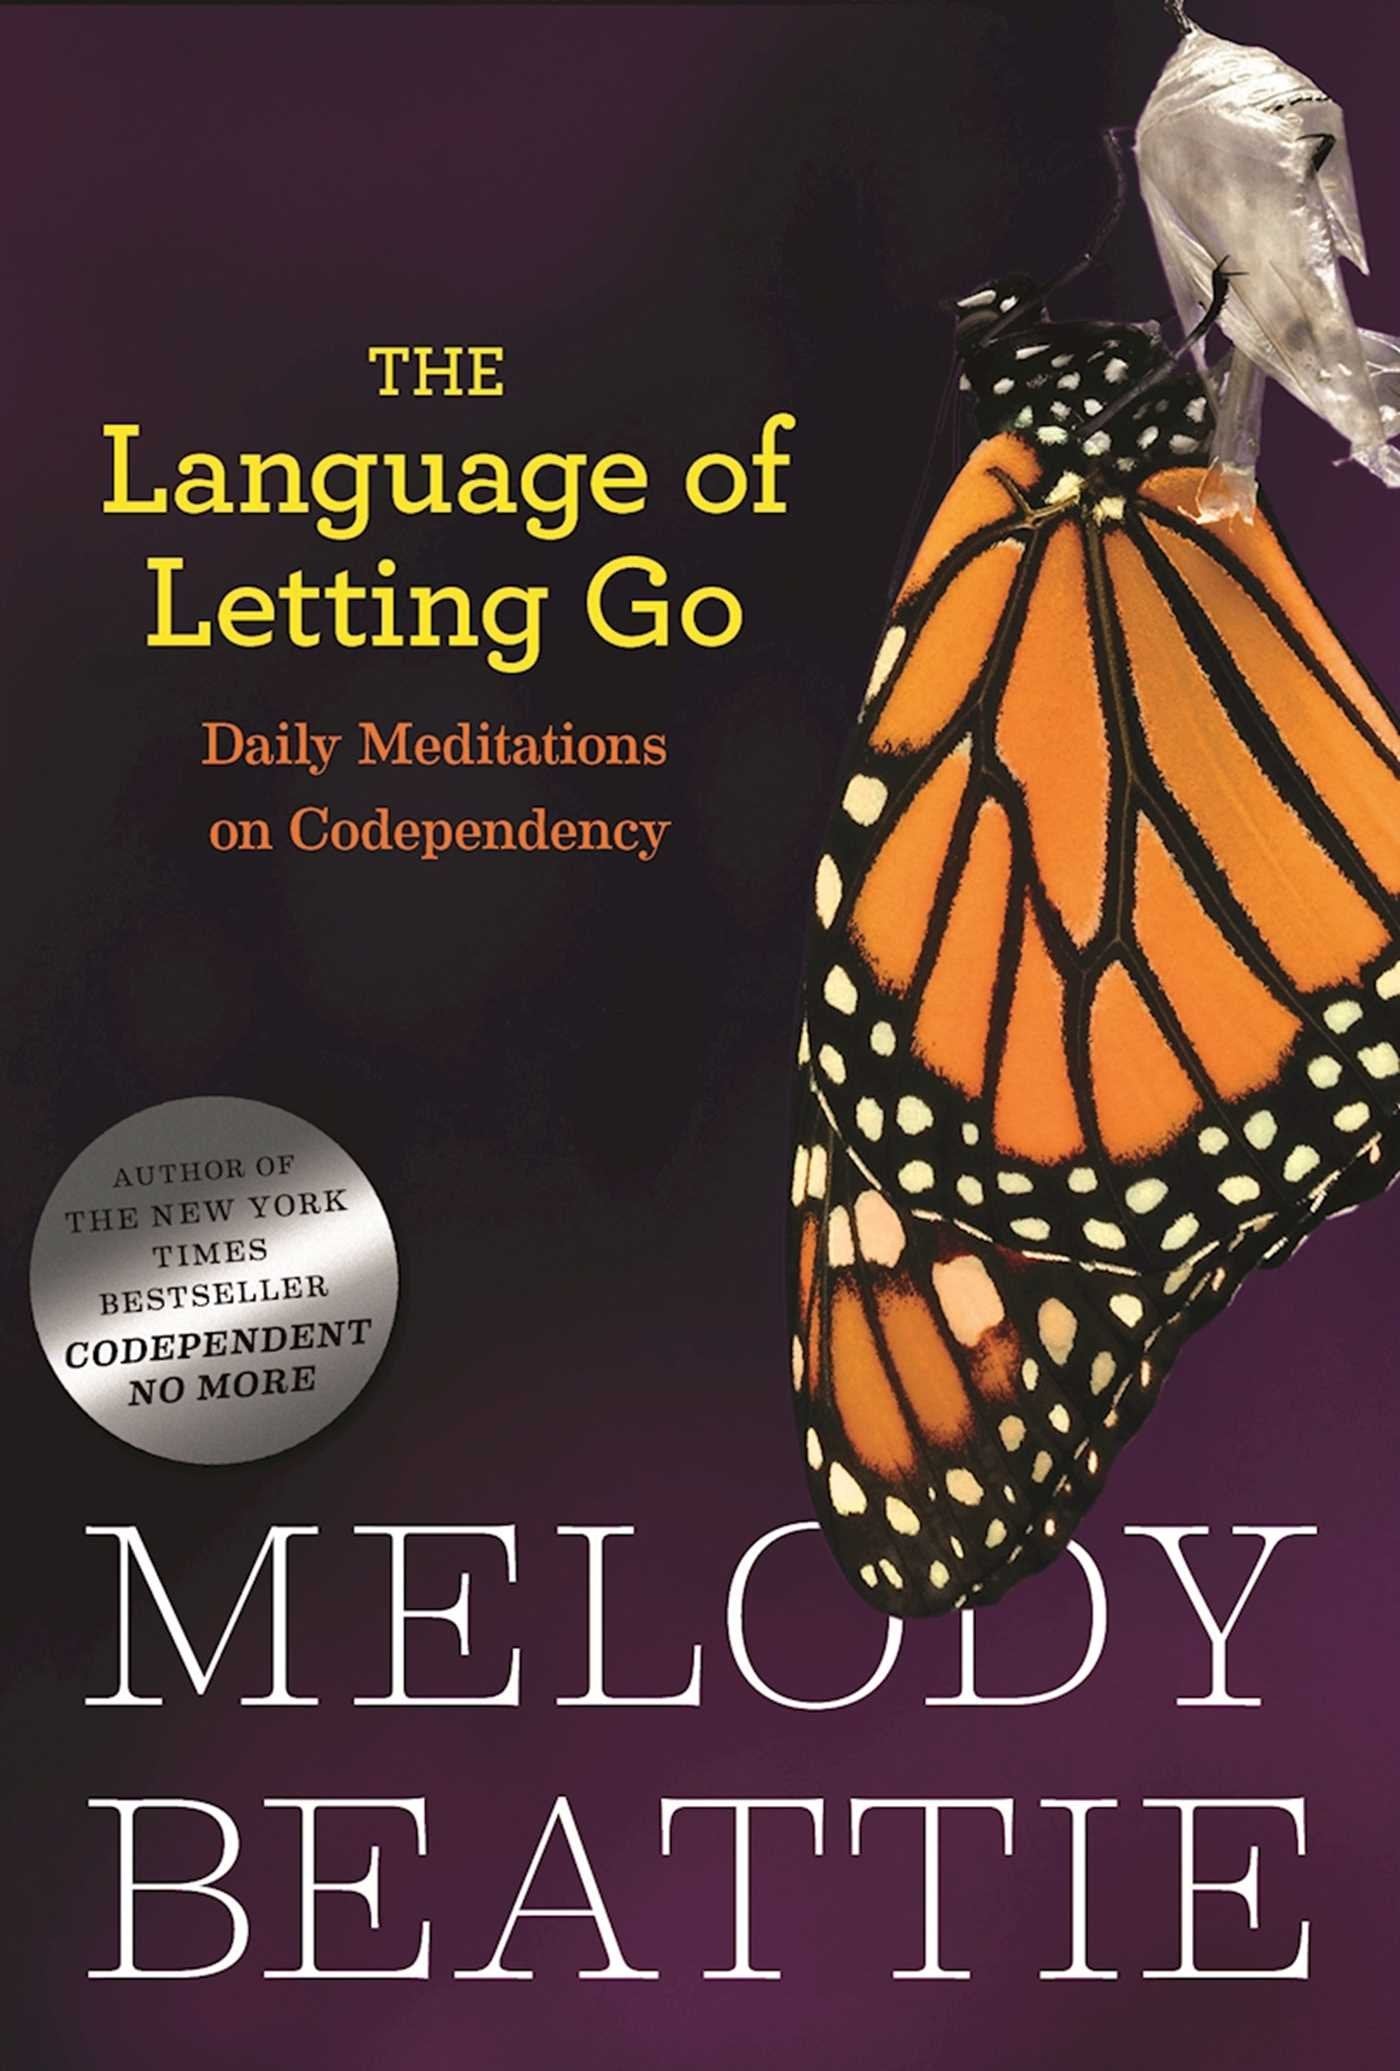 The Language of Letting go - Journal by Melody Beattie